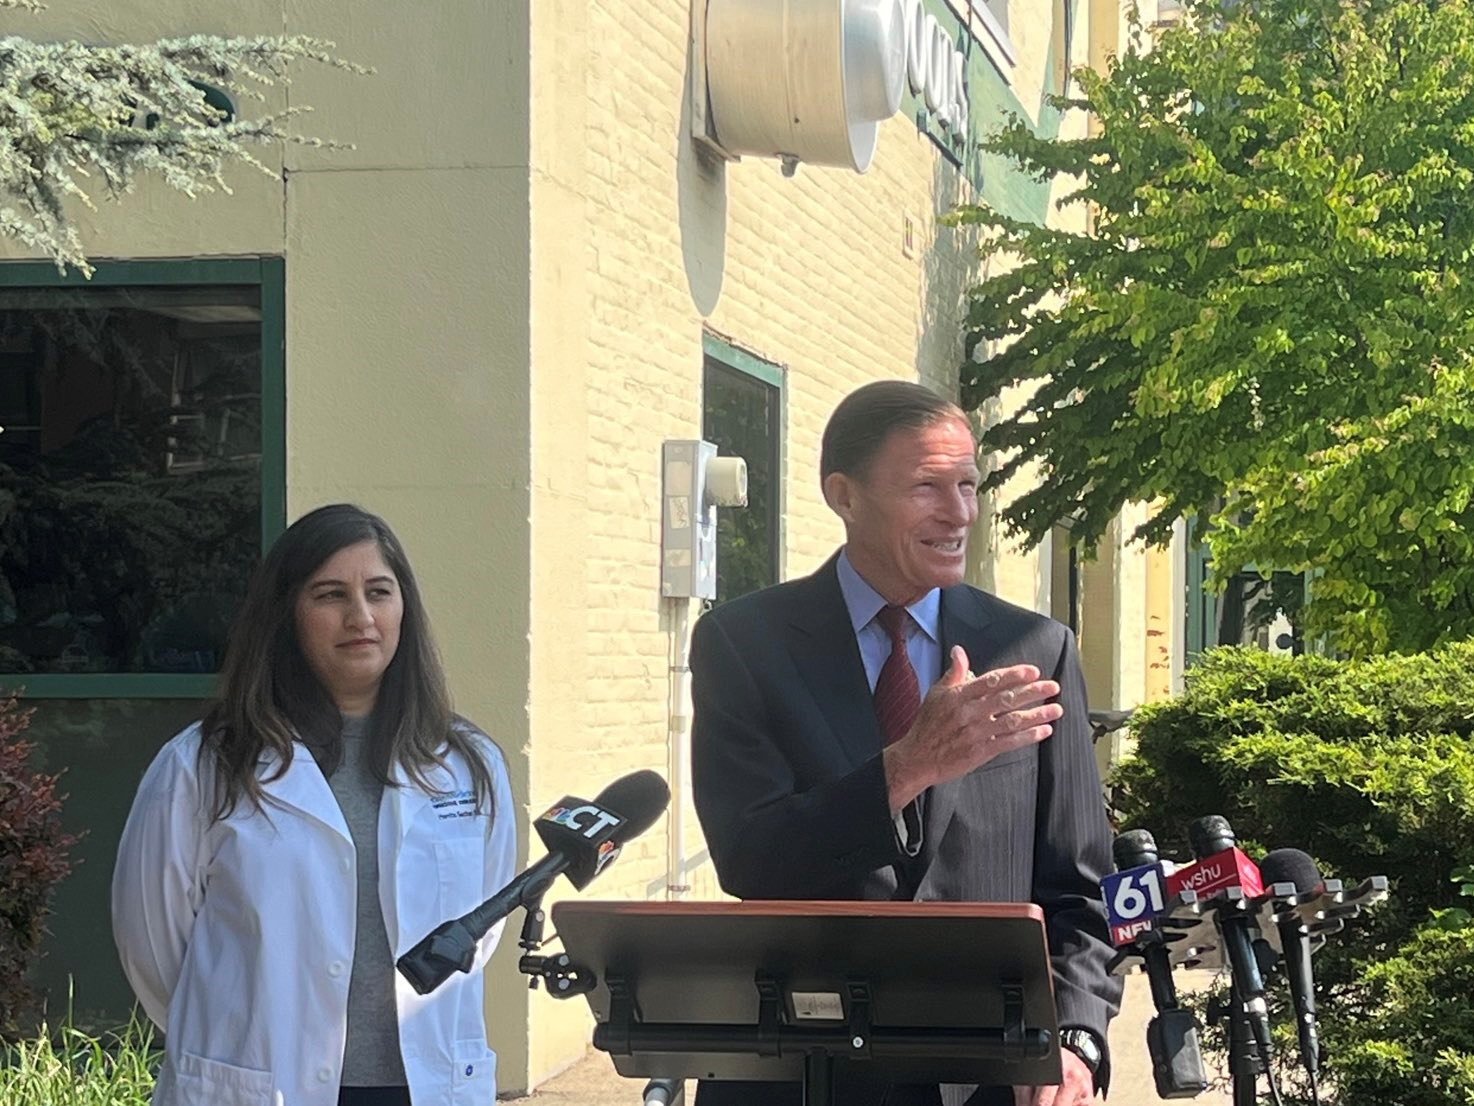 Blumenthal joined health experts to urge passage of the Food Labeling Modernization Act, legislation which would require the Food and Drug Administration (FDA) to establish a front-of-package food labeling system, implement updates to the ingredient list on packaged foods, and apply new guidelines for the use of “healthy” and other deceptive terms to market foods.